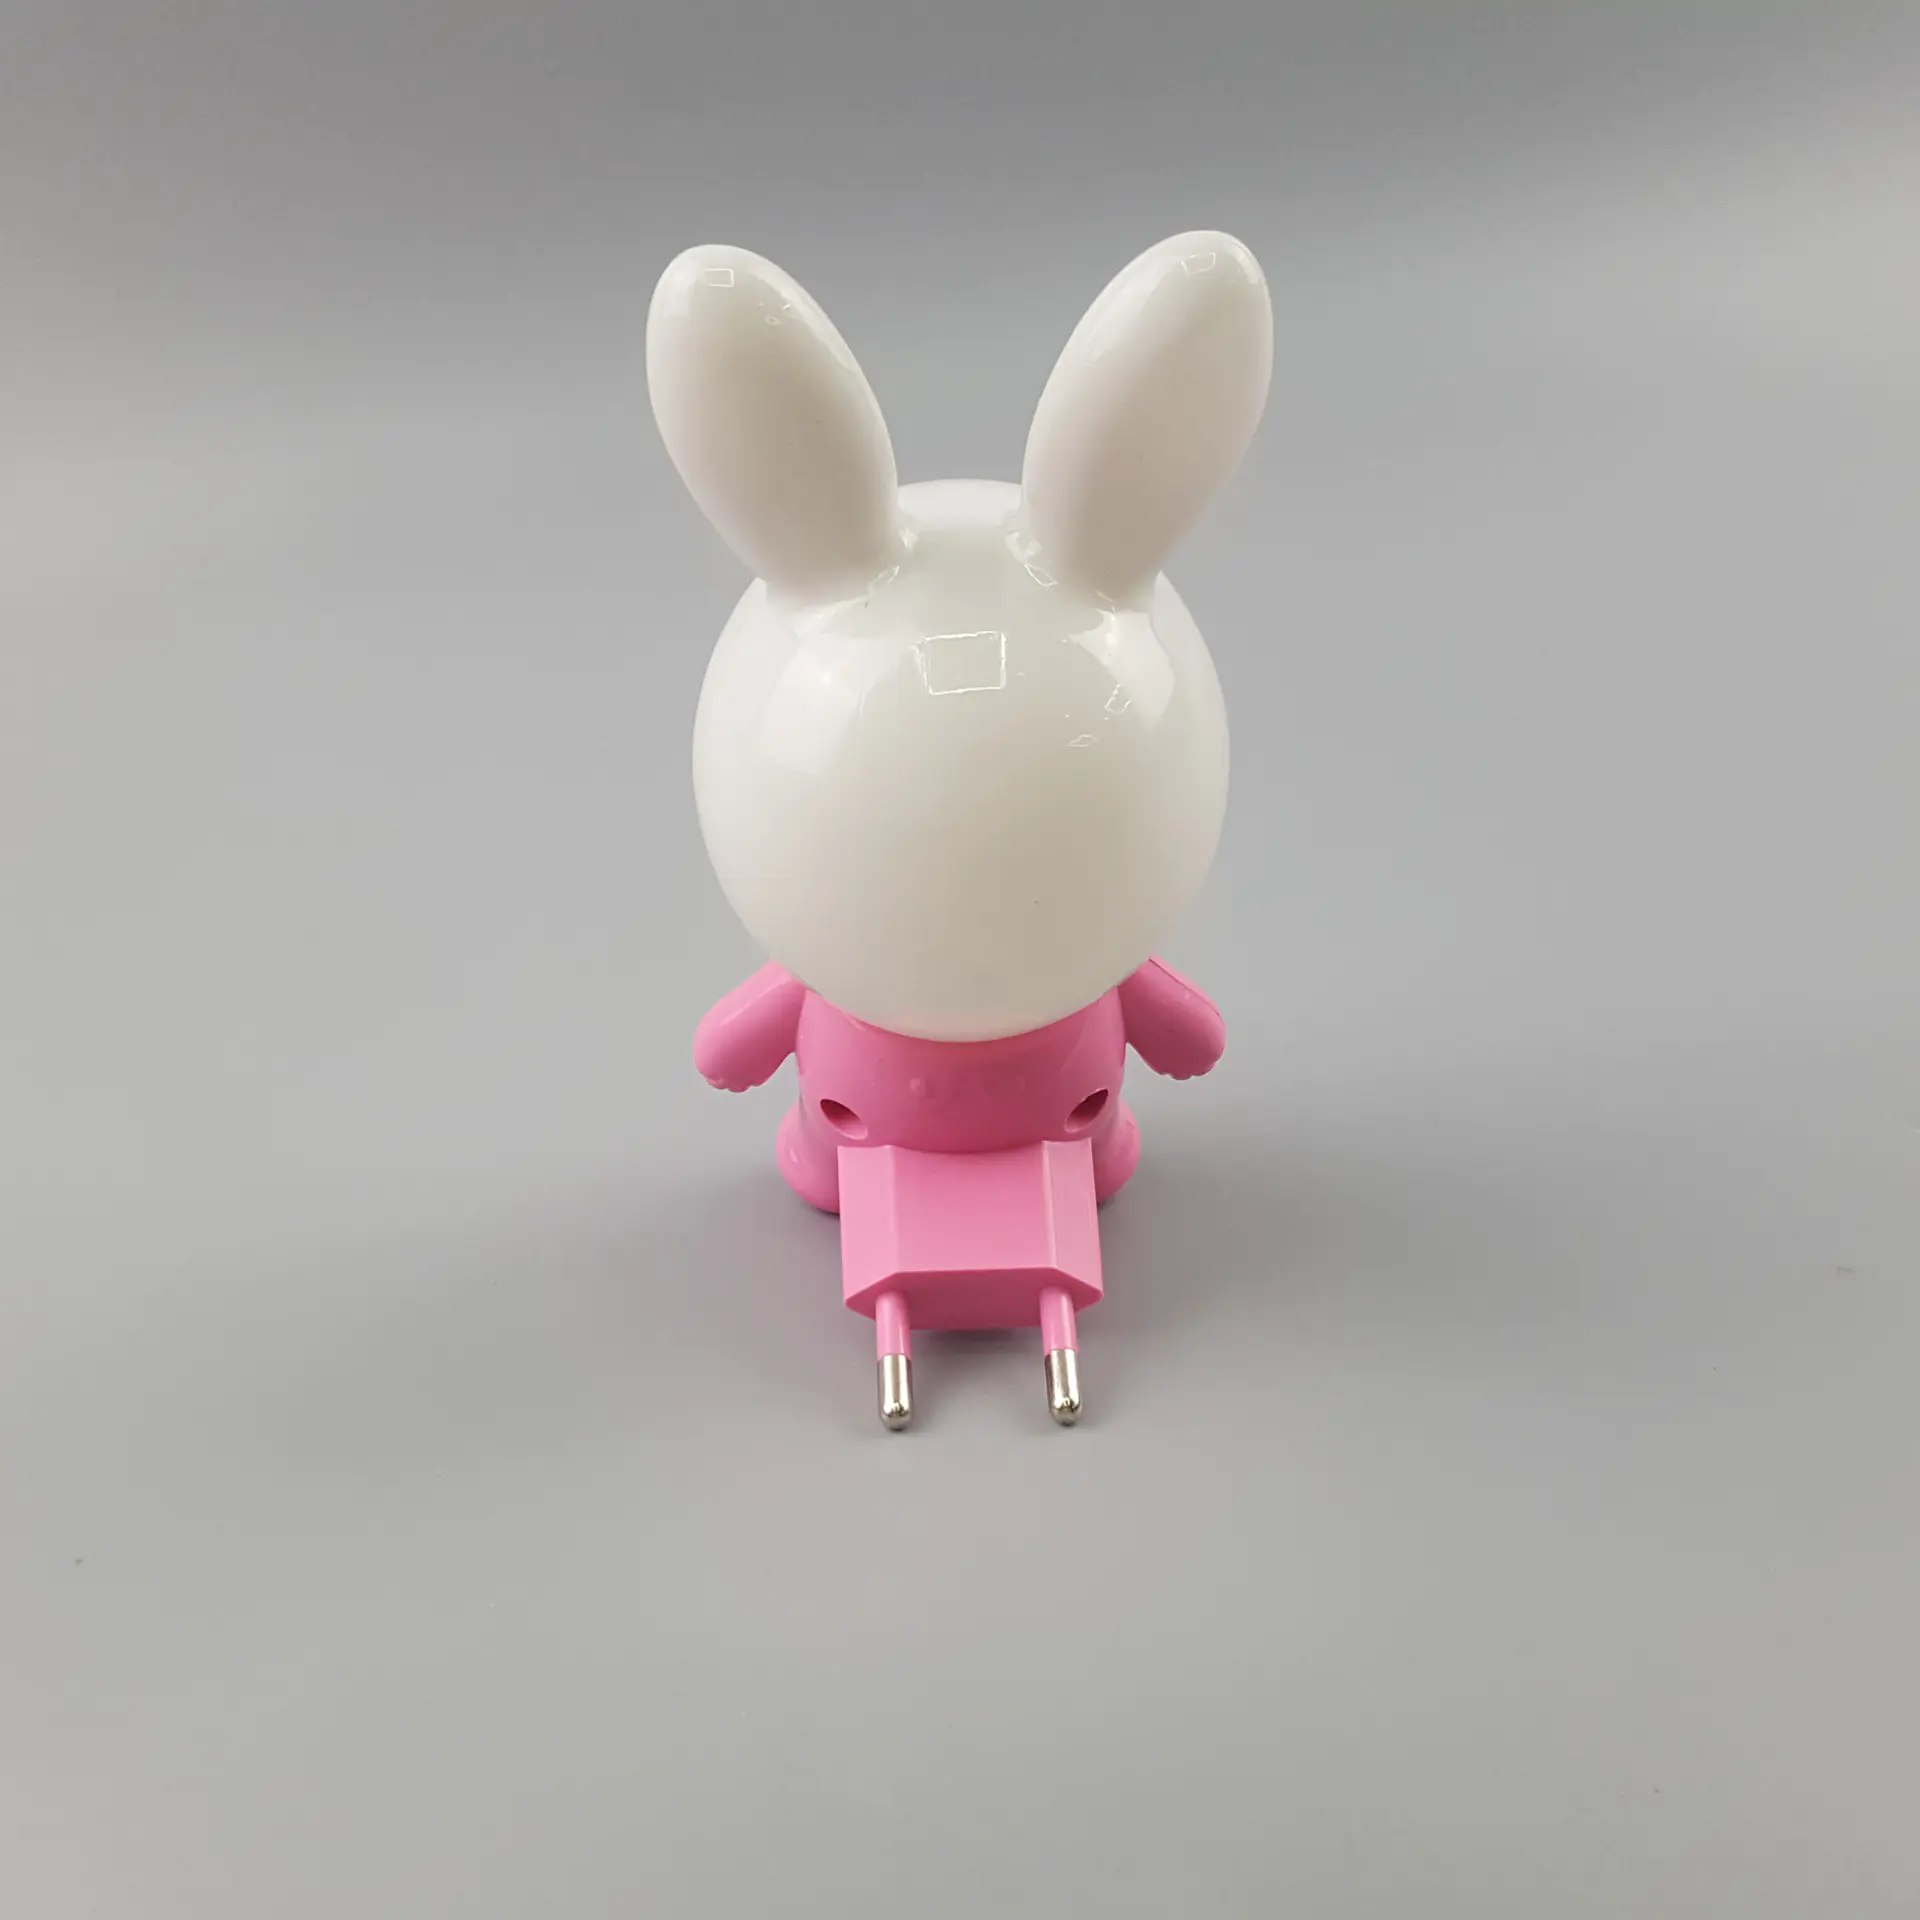 W124 pink rabbit lamp switch plug in led night light For Baby Bedroom wall decoration child gift